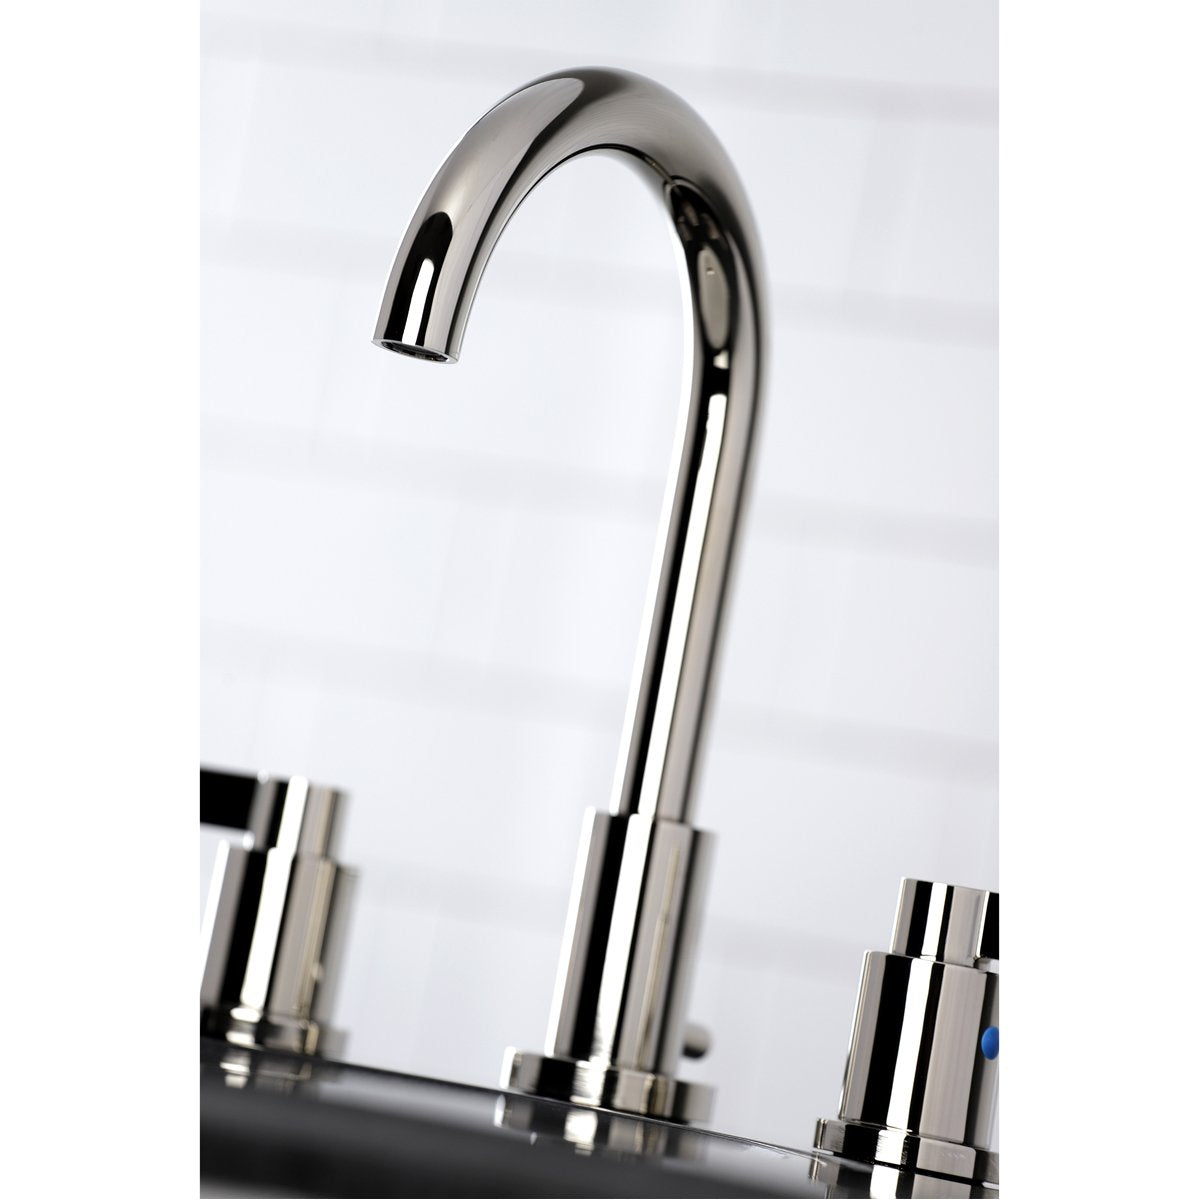 Kingston Brass Fauceture NuvoFusion Widespread Bathroom Faucet